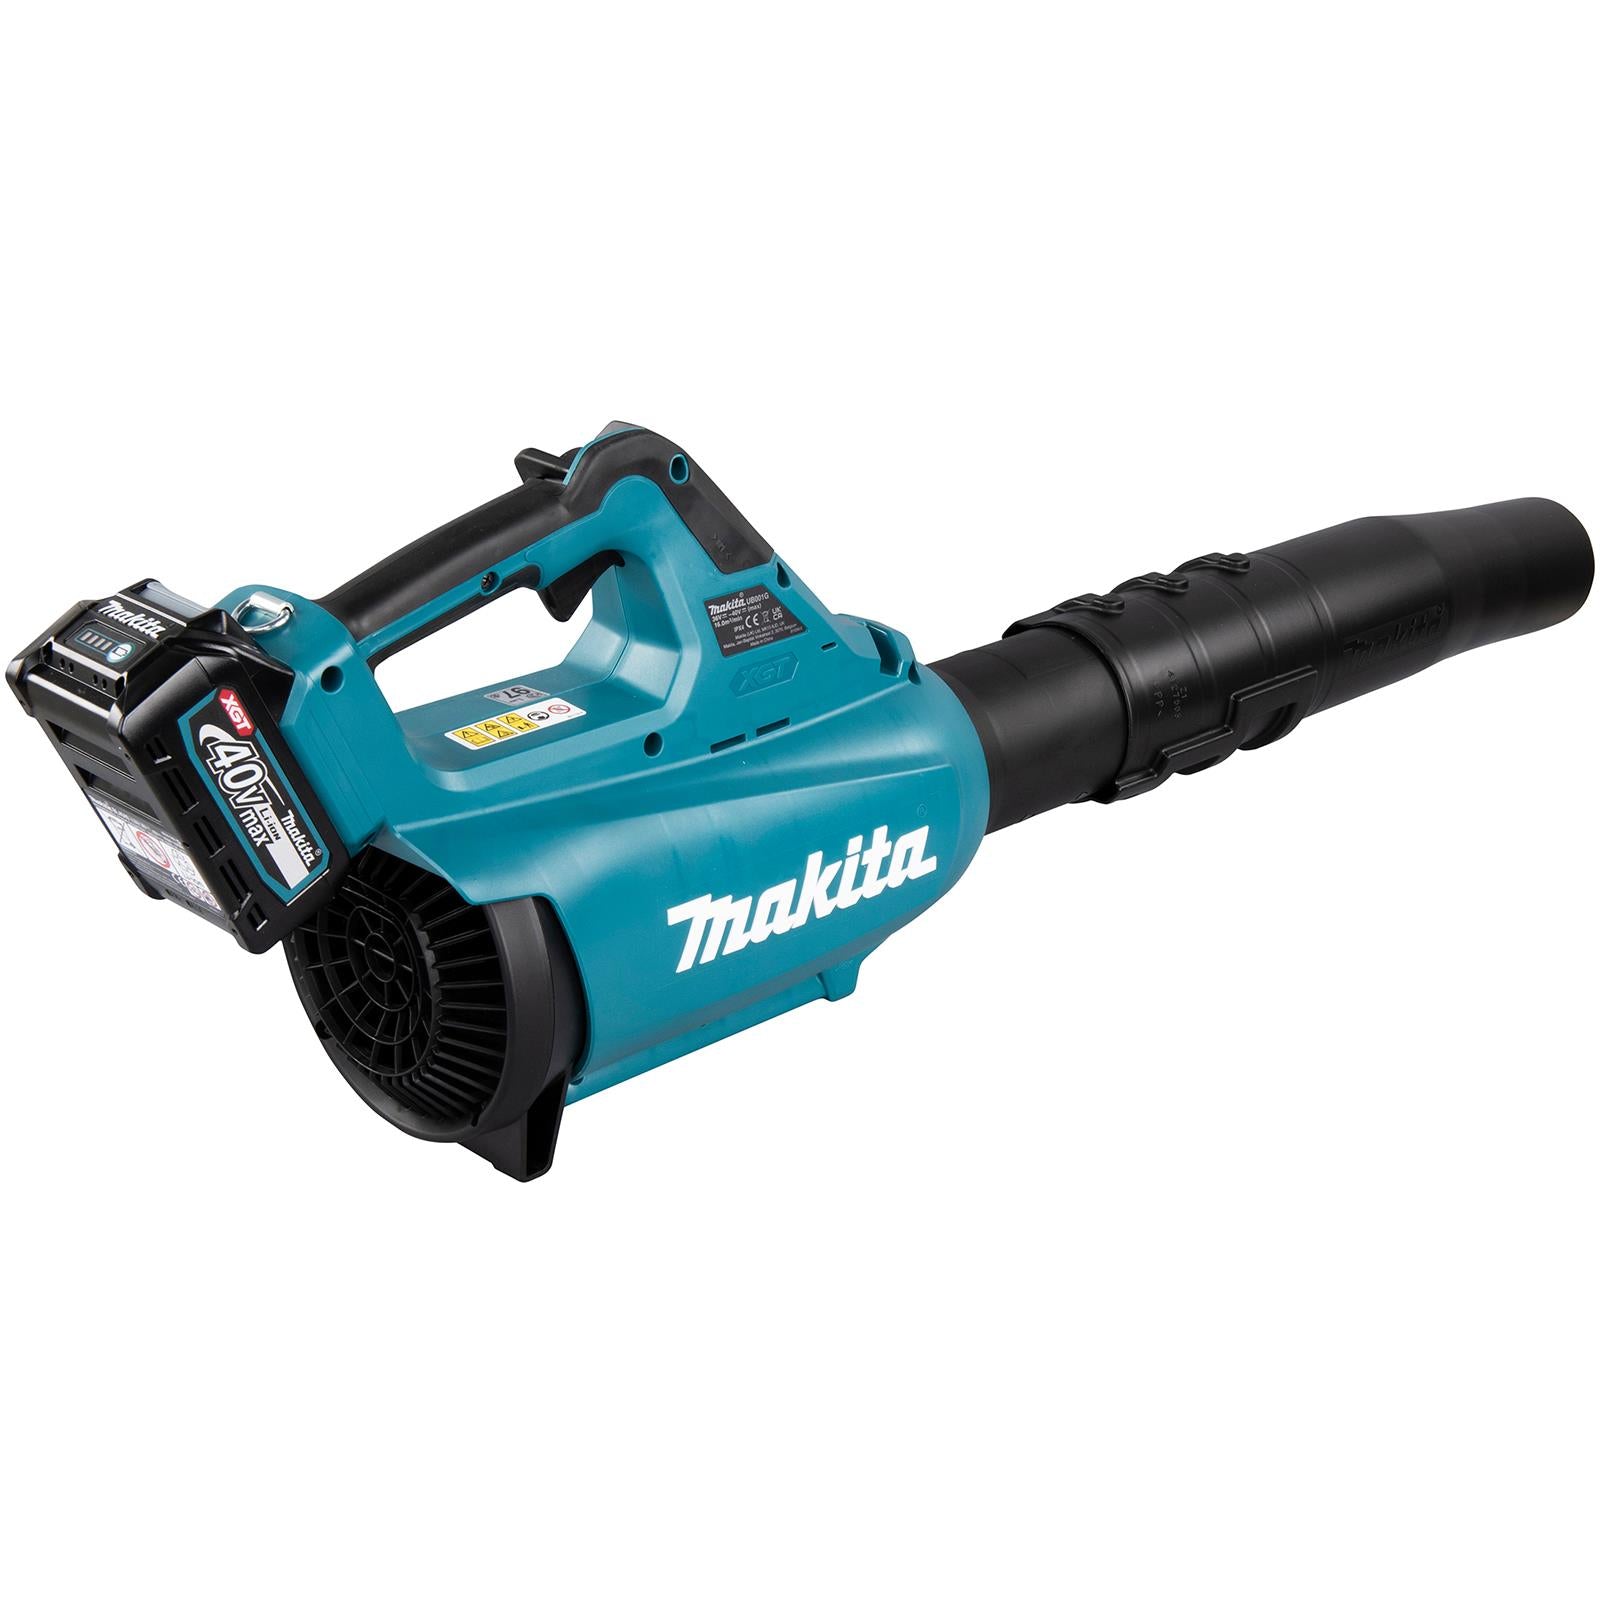 Makita Leaf Blower 40V XGT Brushless Cordless 2 x 2.5Ah Battery and Rapid Charger 17N Garden Grass Clippings Construction UB001GD202